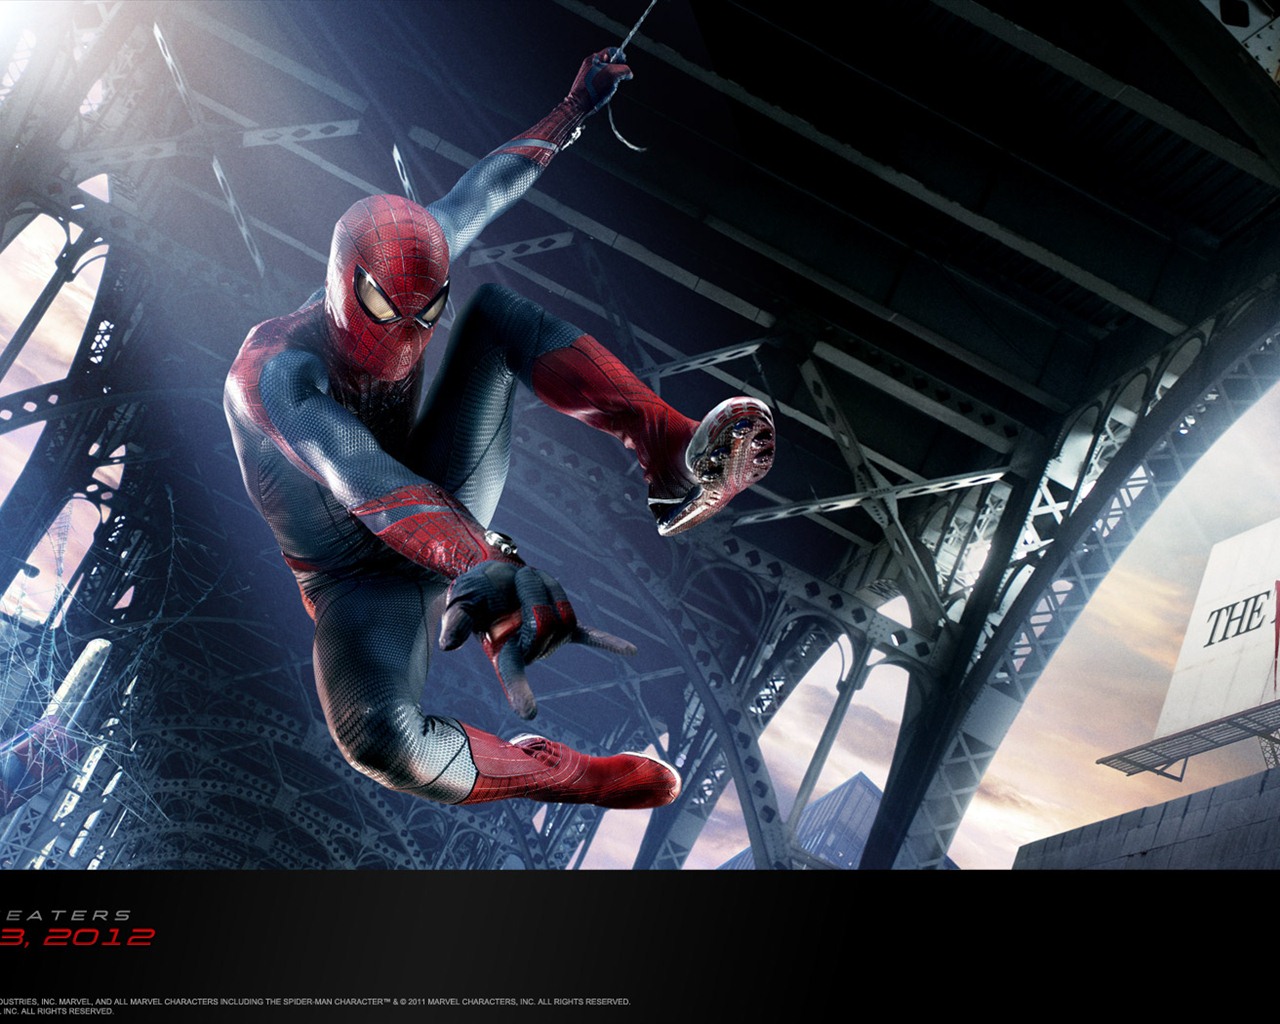 The Amazing Spider-Man 2012 wallpapers #6 - 1280x1024